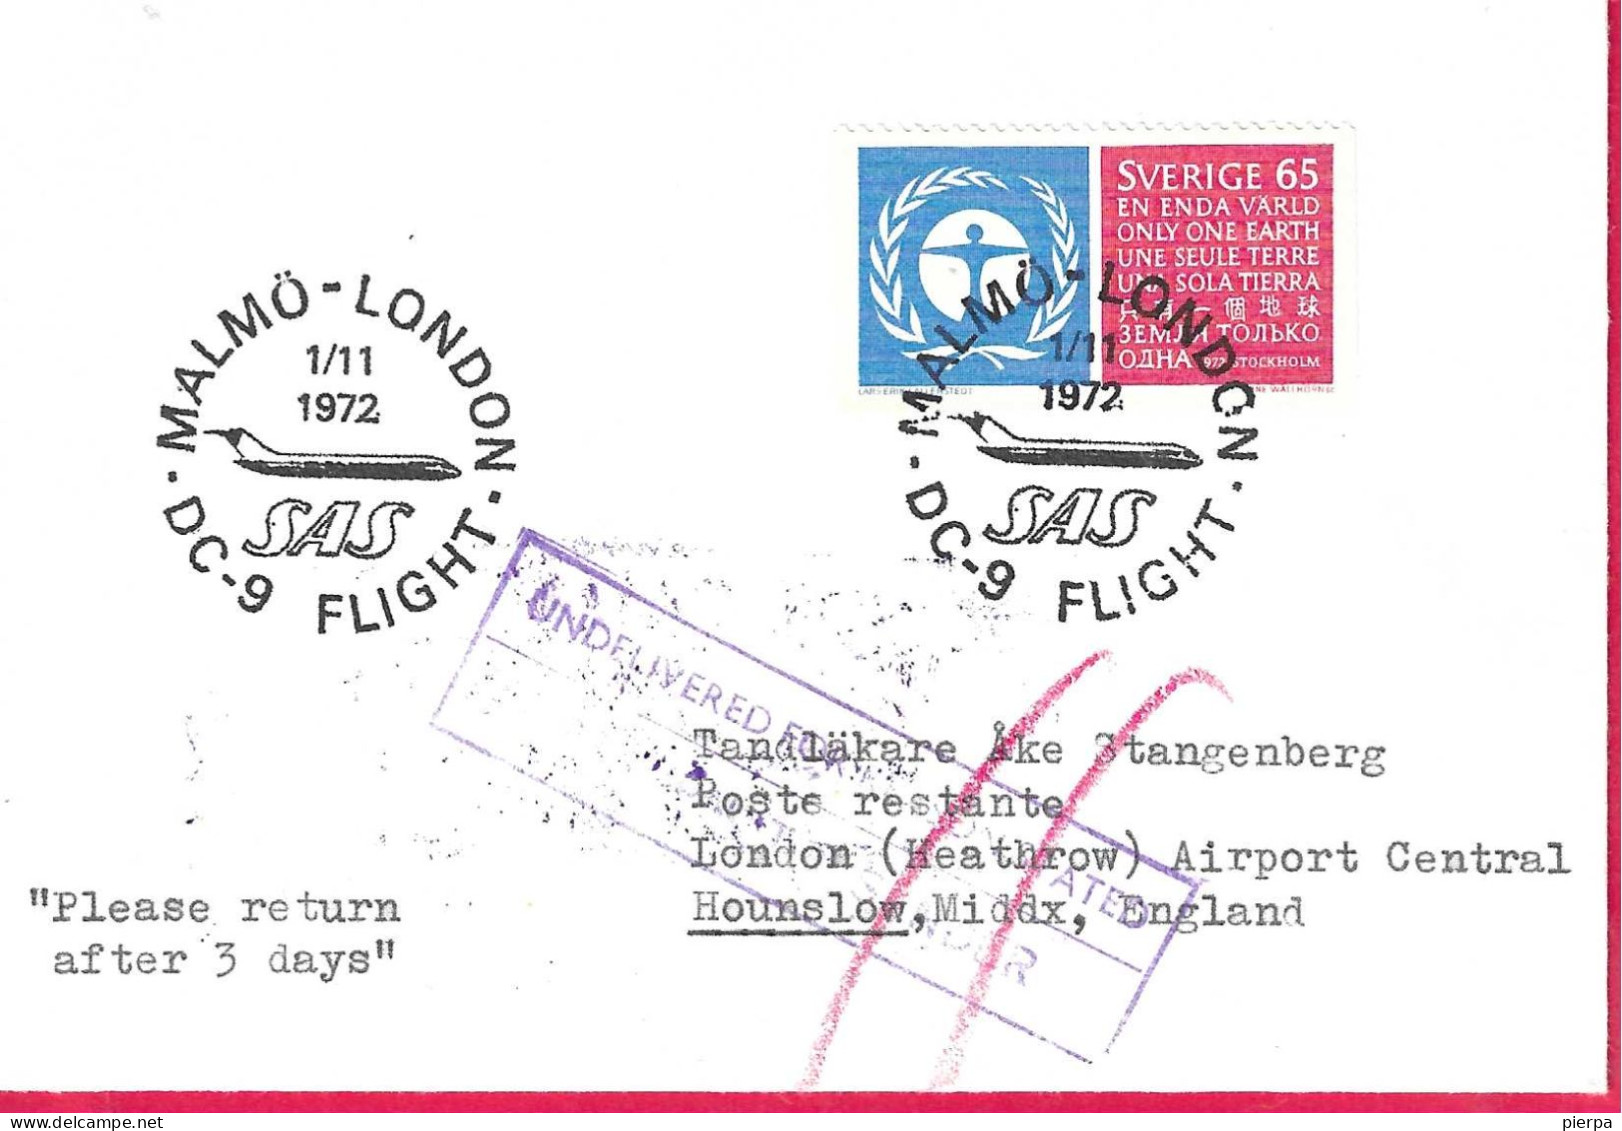 SVERIGE - FIRST DC-9 FLIGHT SAS FROM MALMO TO LONDON * 1.11.1972* ON OFFICIAL ENVELOPE - Covers & Documents